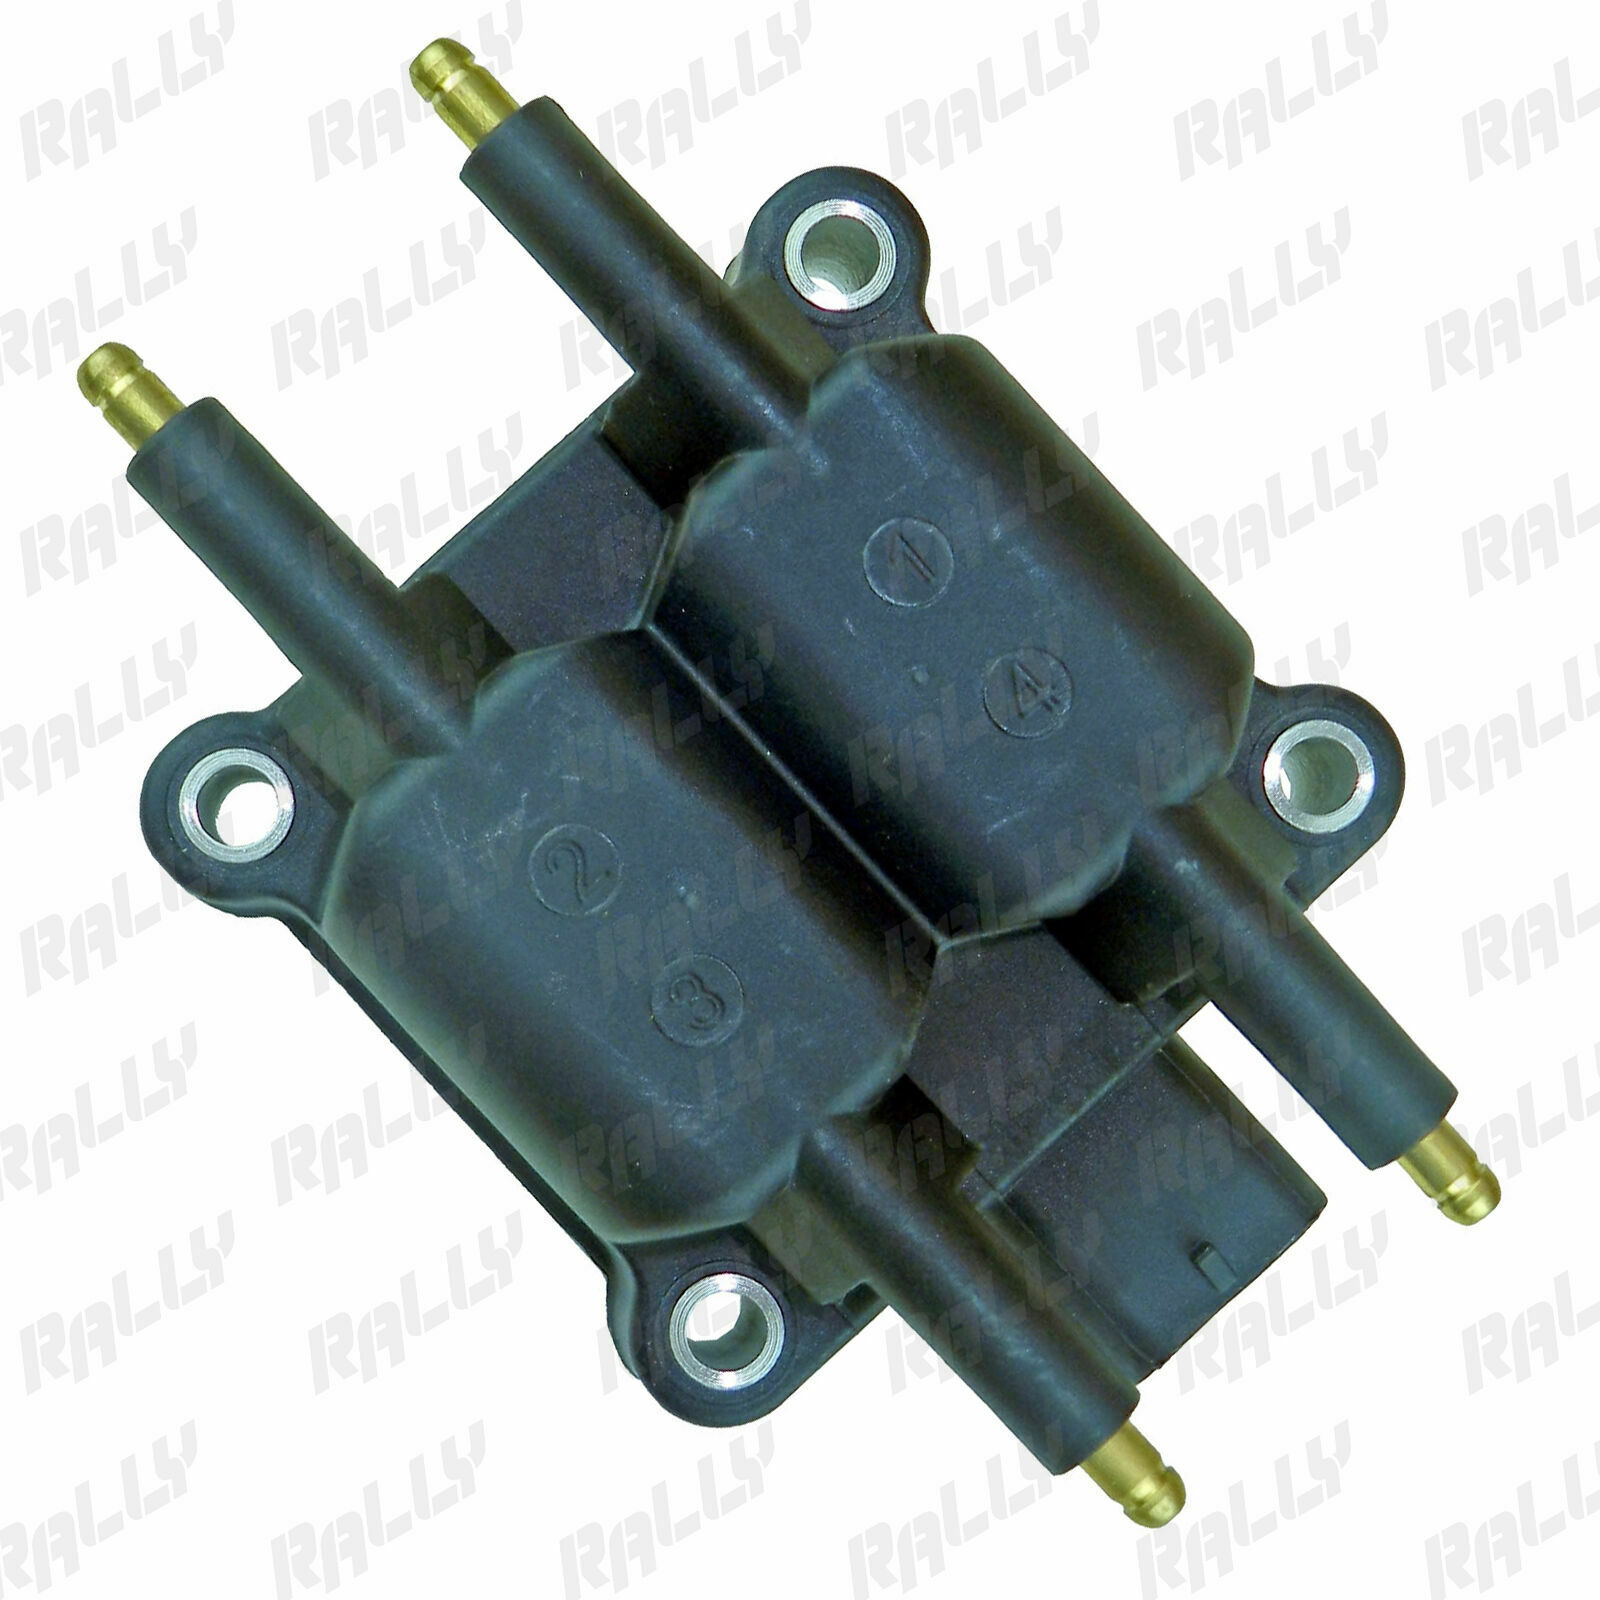 New Ignition Coil Mitsu Eclipse Chrysler Dodge Plymouth Sohc 4557468 UF125 (361)